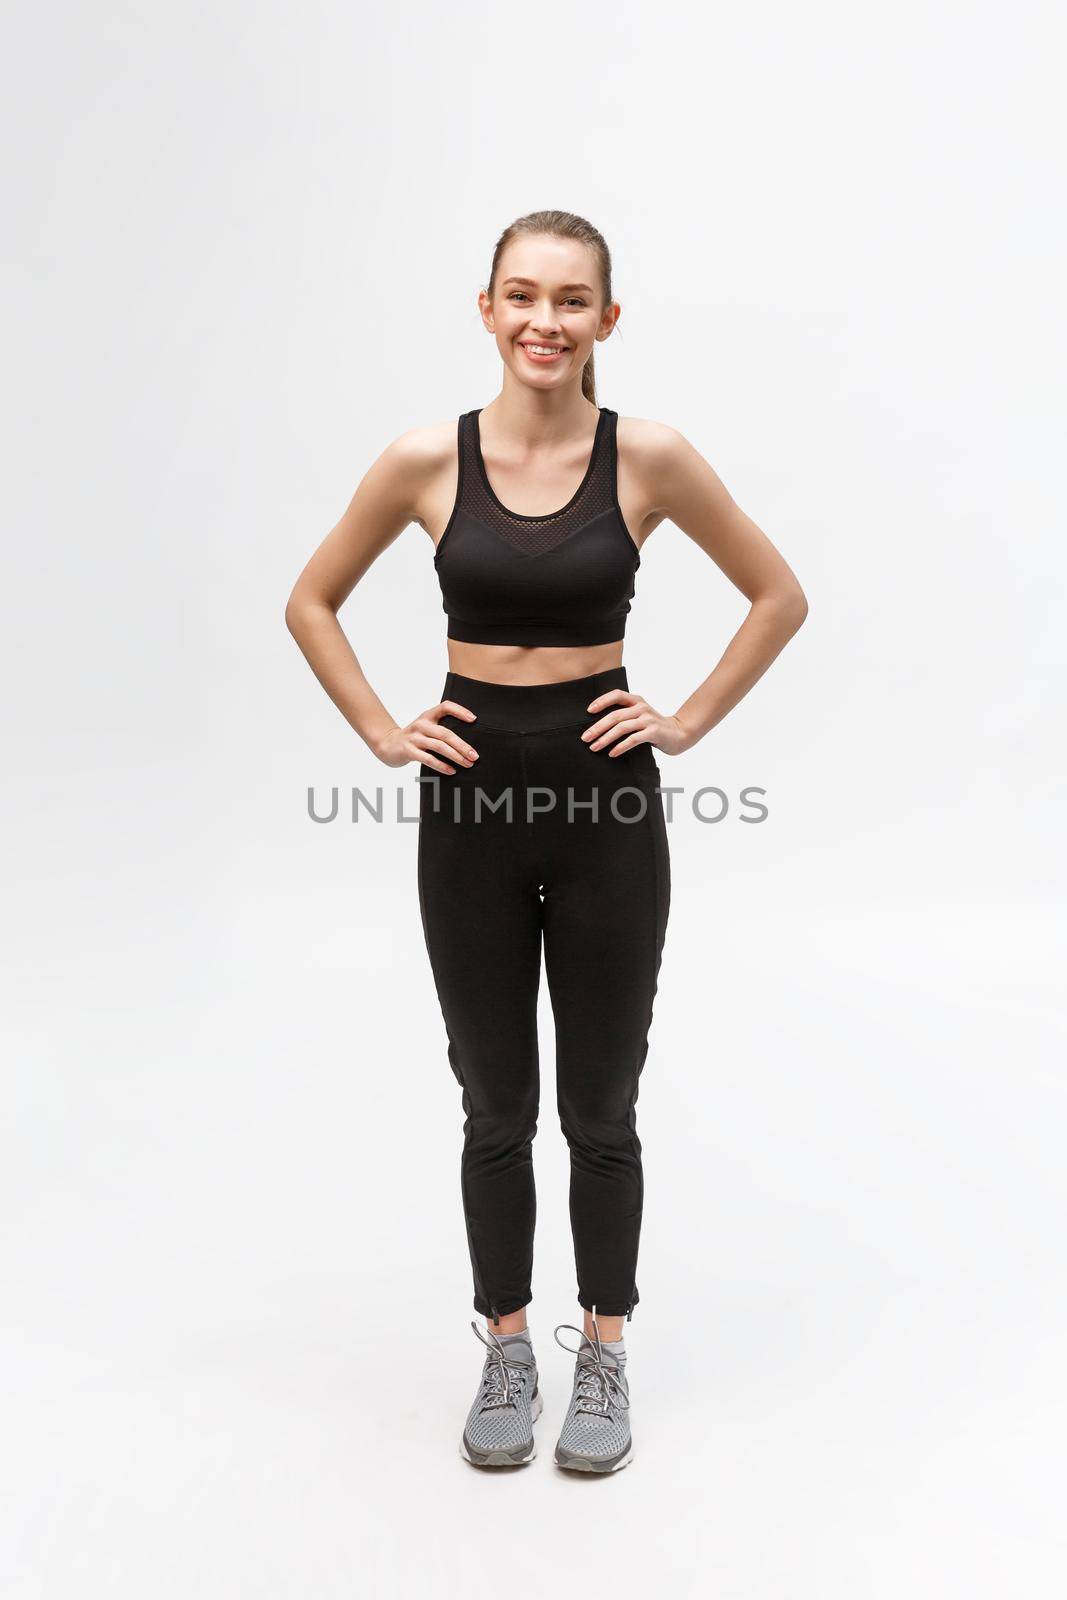 Attractive young adult in sportswear posing on white background. Sexy and sensual brunette woman with perfect body posing in studio isolated over white background with copyspace.